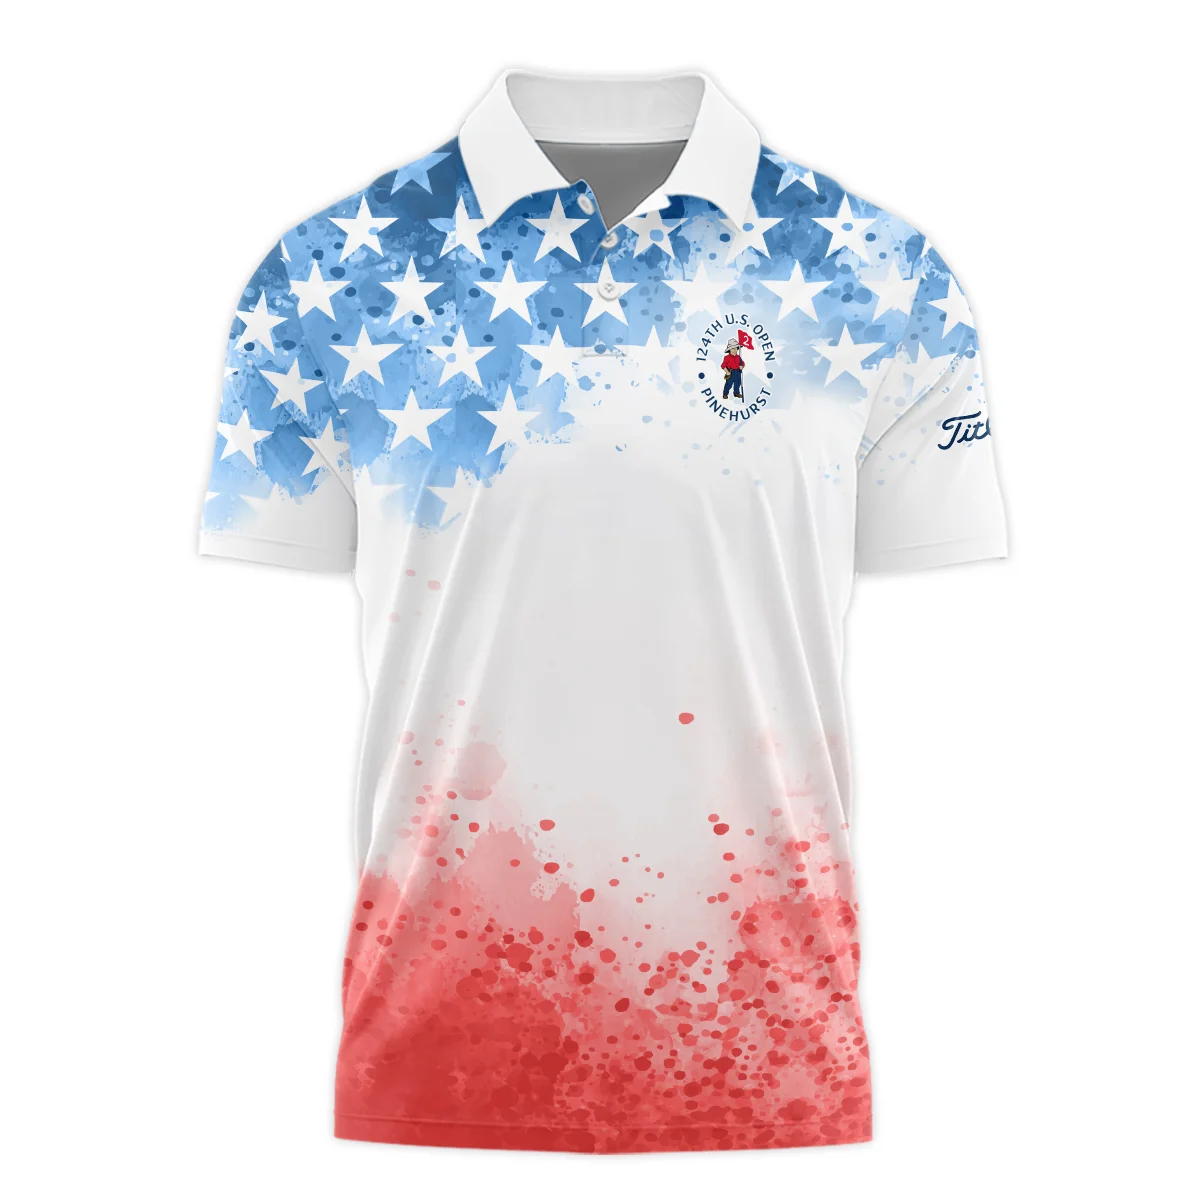 Special Version 124th U.S. Open Pinehurst Titleist Polo Shirt Watercolor Blue Red Stars Polo Shirt For Men